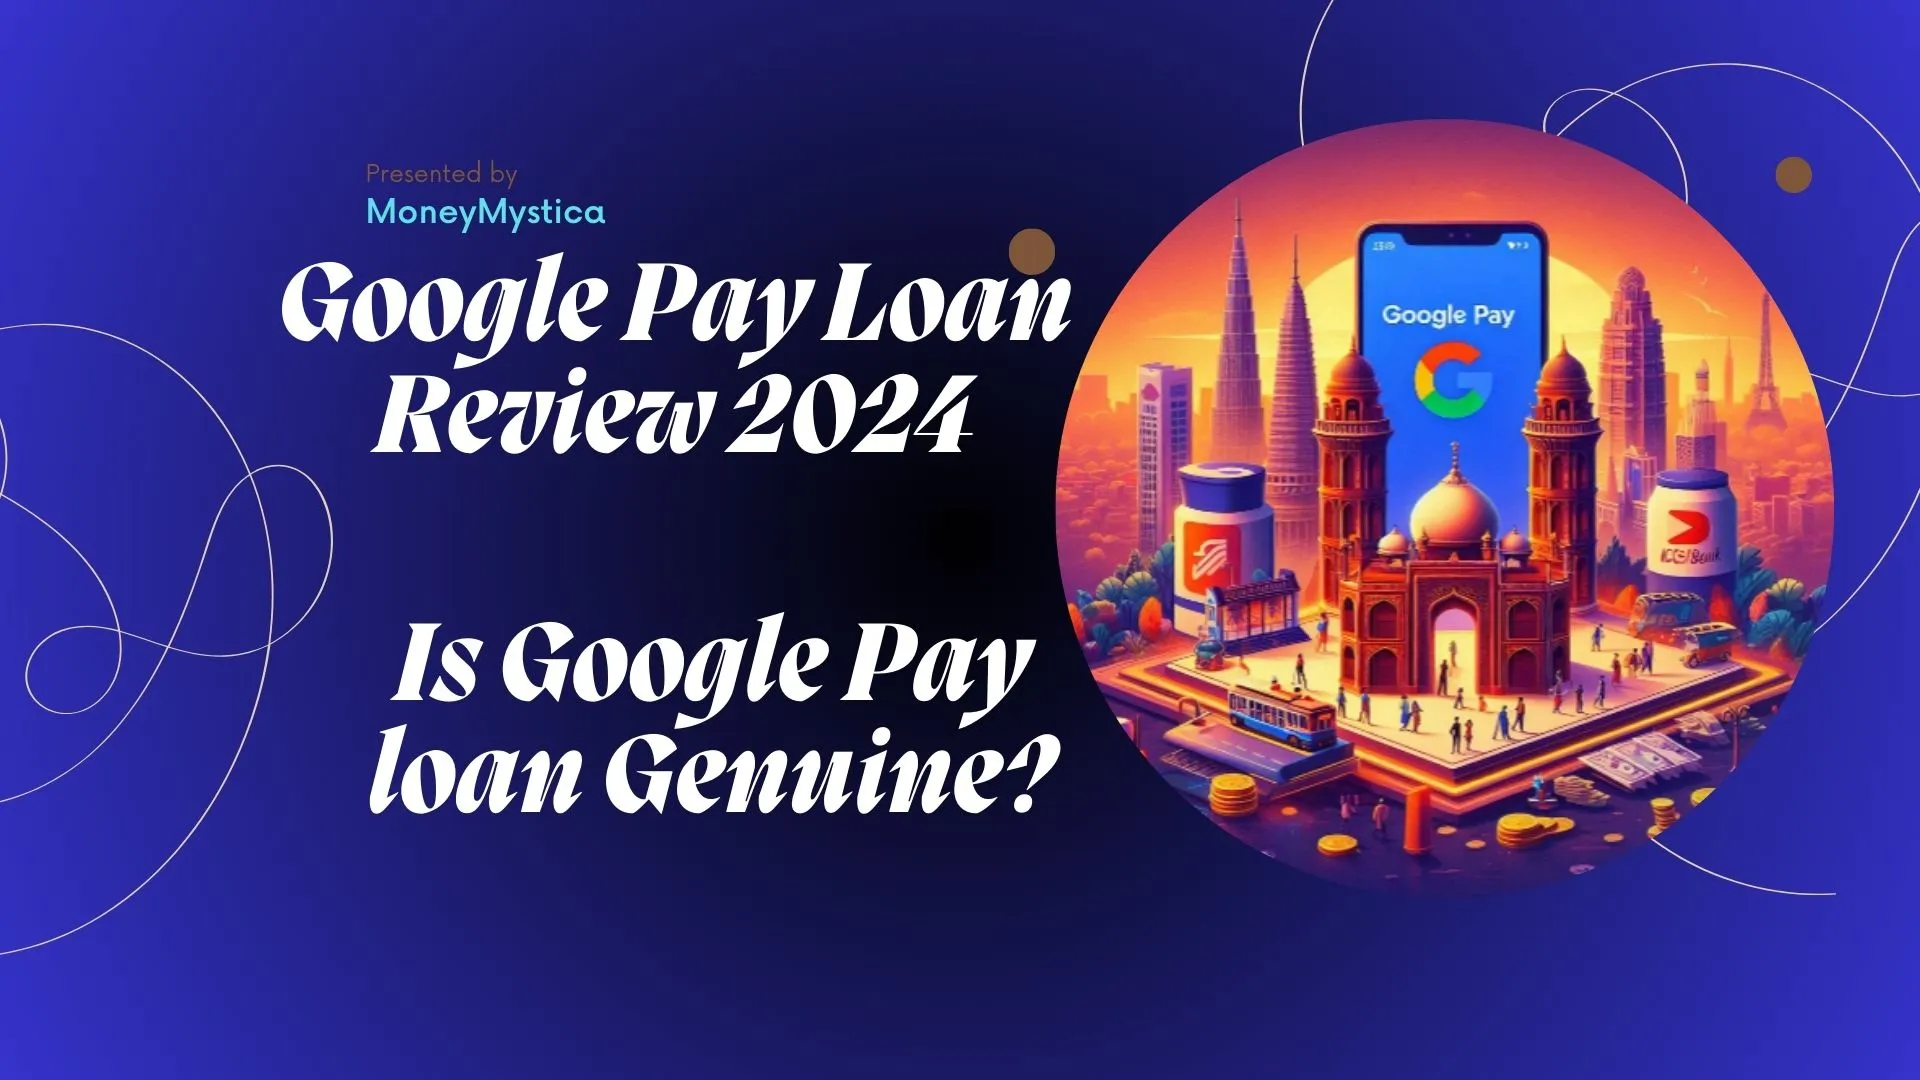 Google Pay Loan Review 2024: Is Google Pay loan Genuine?